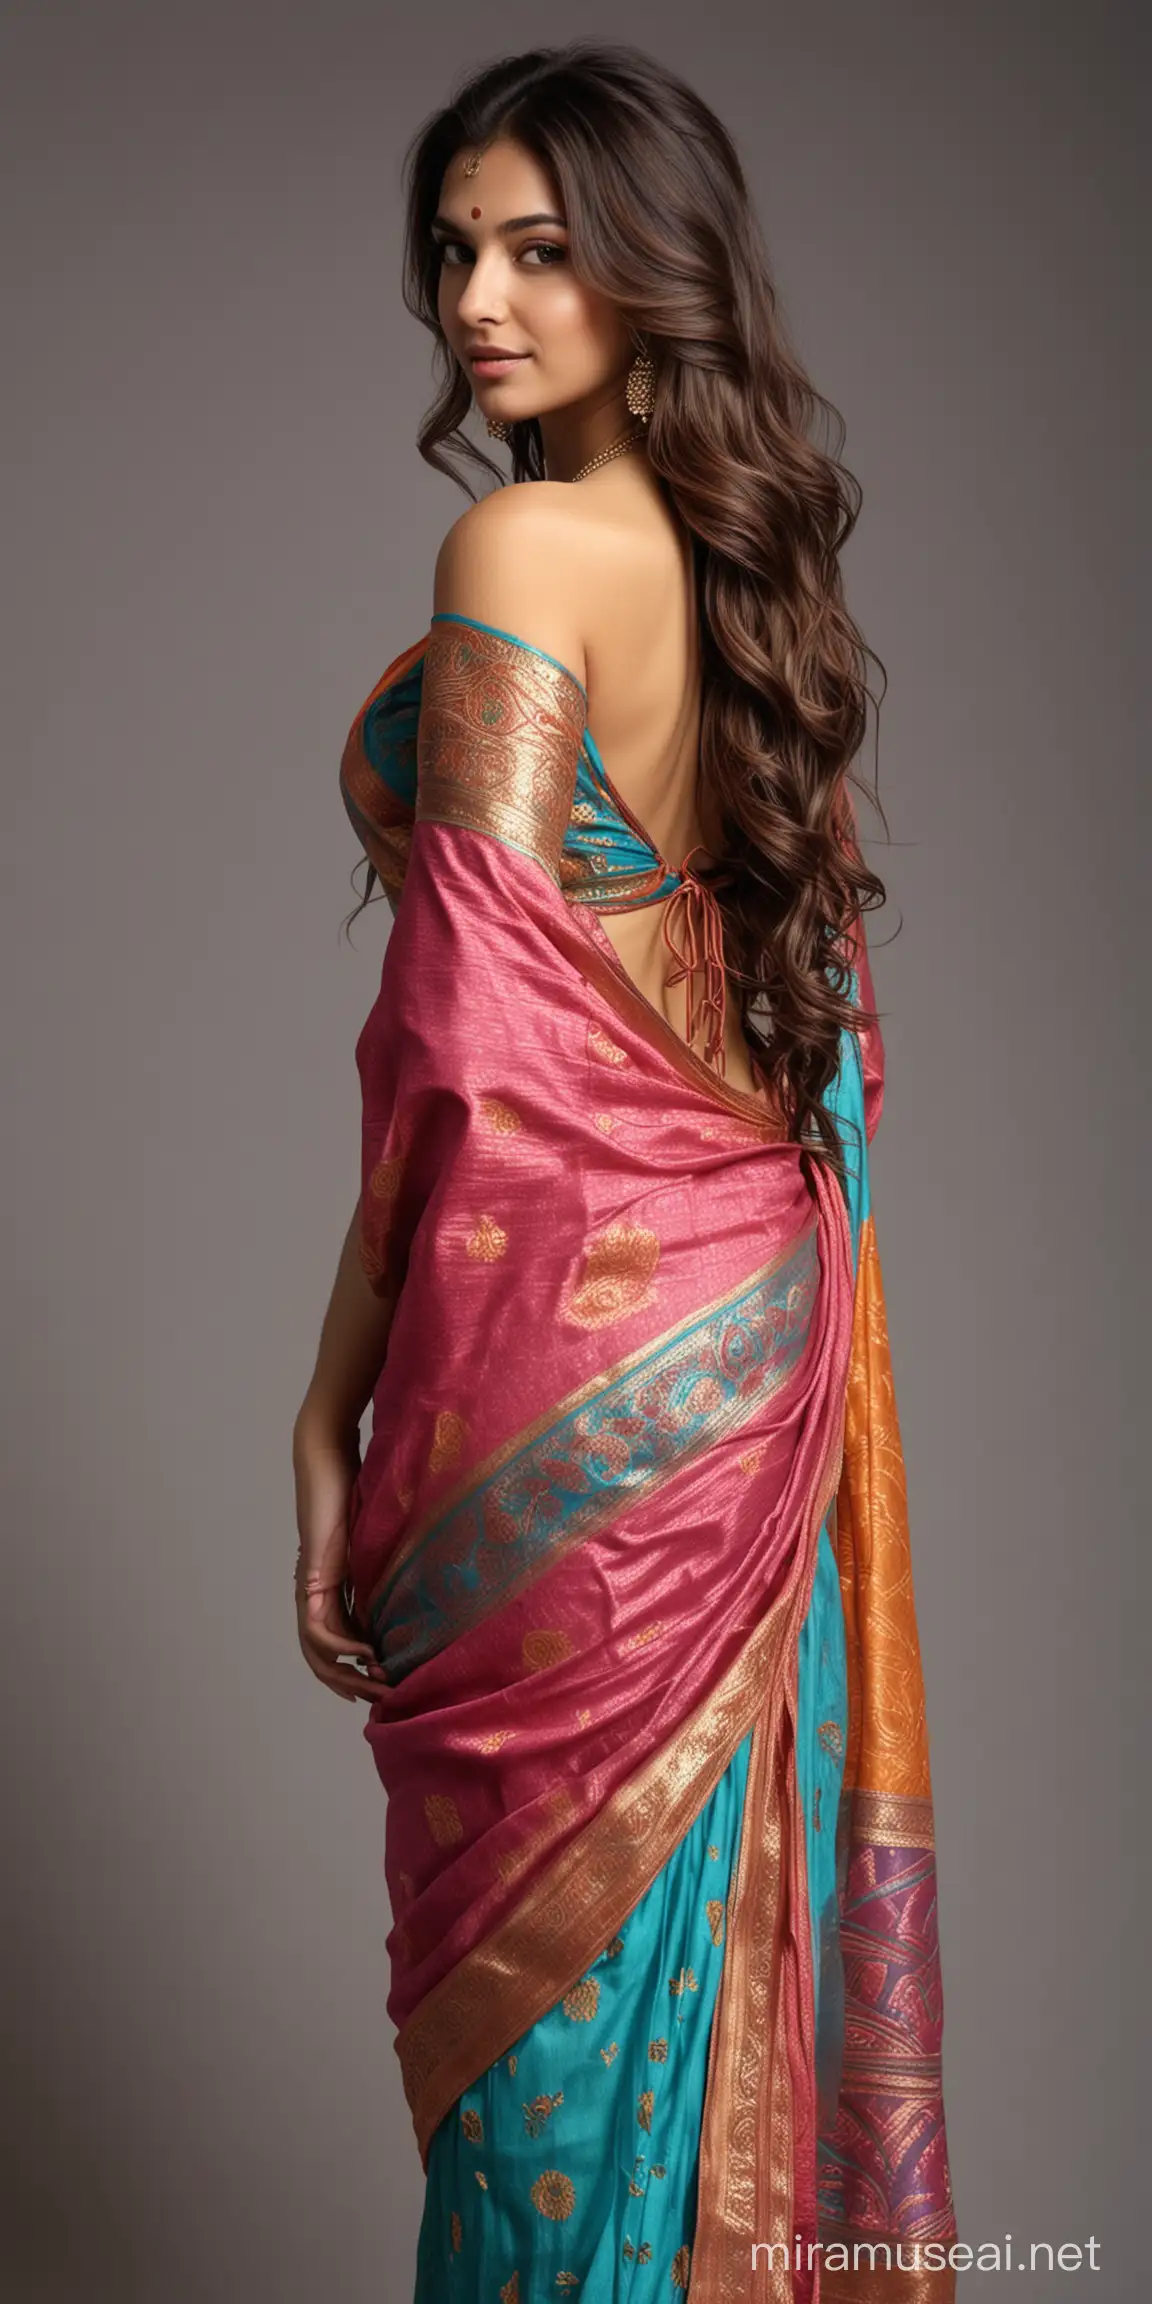 Elegant EuropeanInspired Indian Beauty in Colorful Saree Portrait